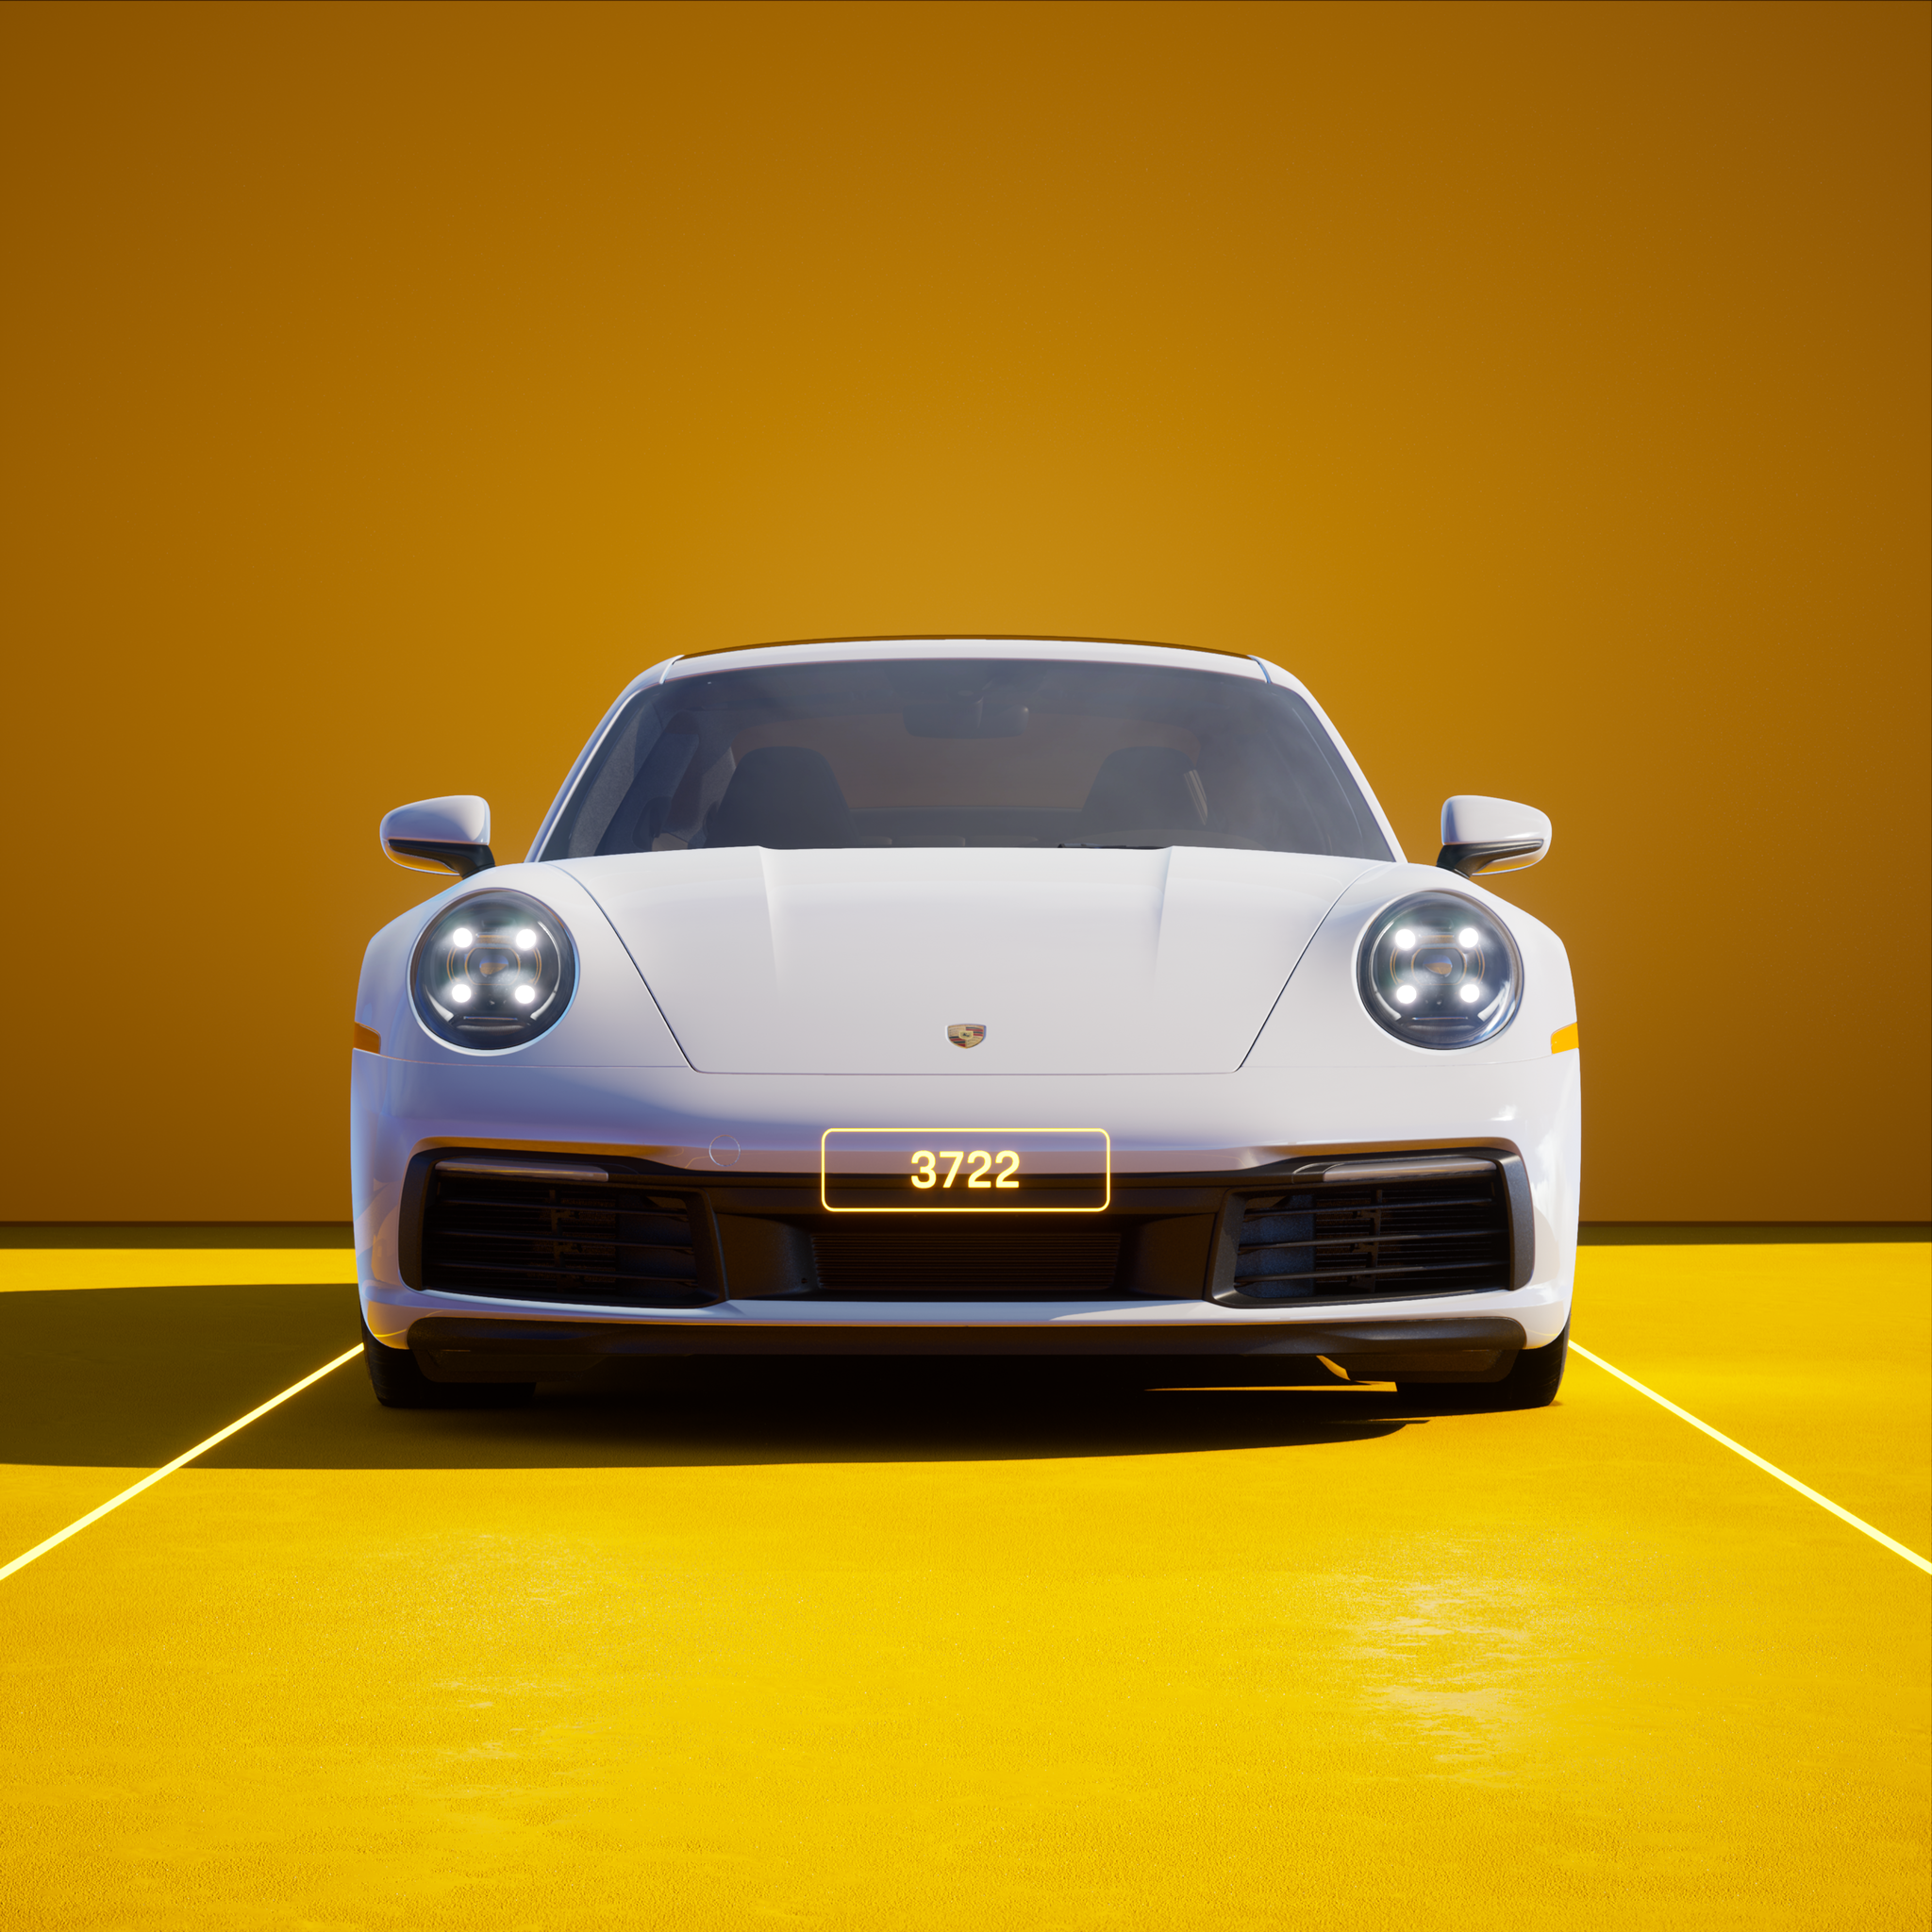 The PORSCHΞ 911 3722 image in phase